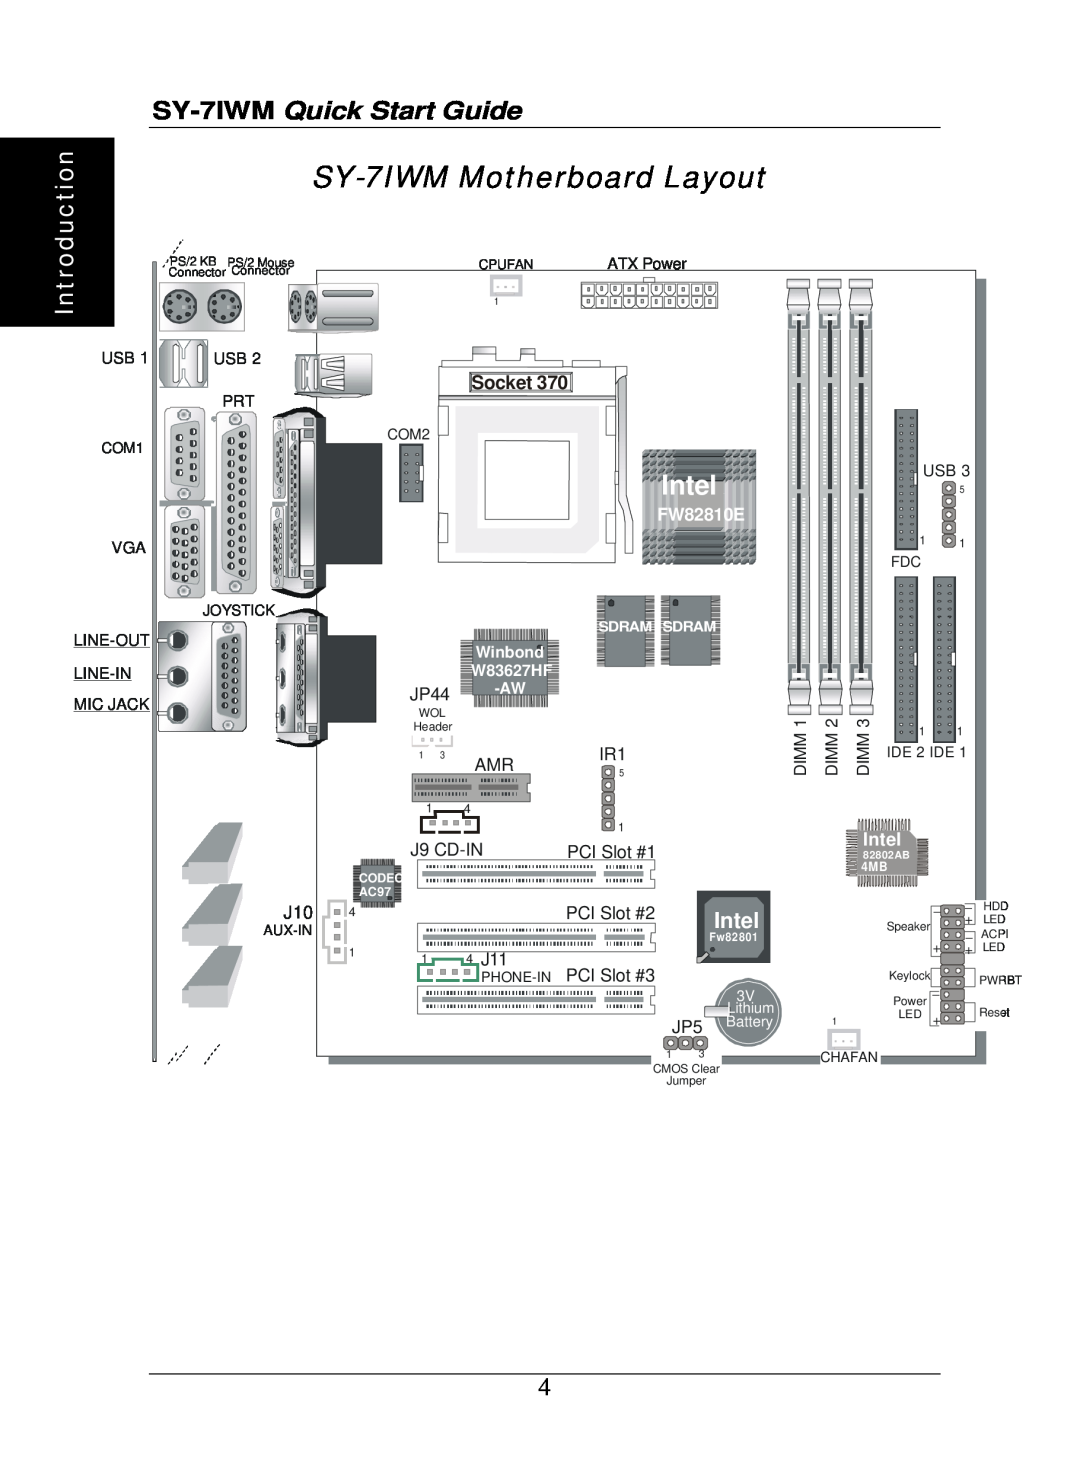 SOYO SY-7IWM Motherboard Layout, Intel, Introduction, SY-7IWM Quick Start Guide, Socket, J9 CD-IN, FW82810E, Line-Out 